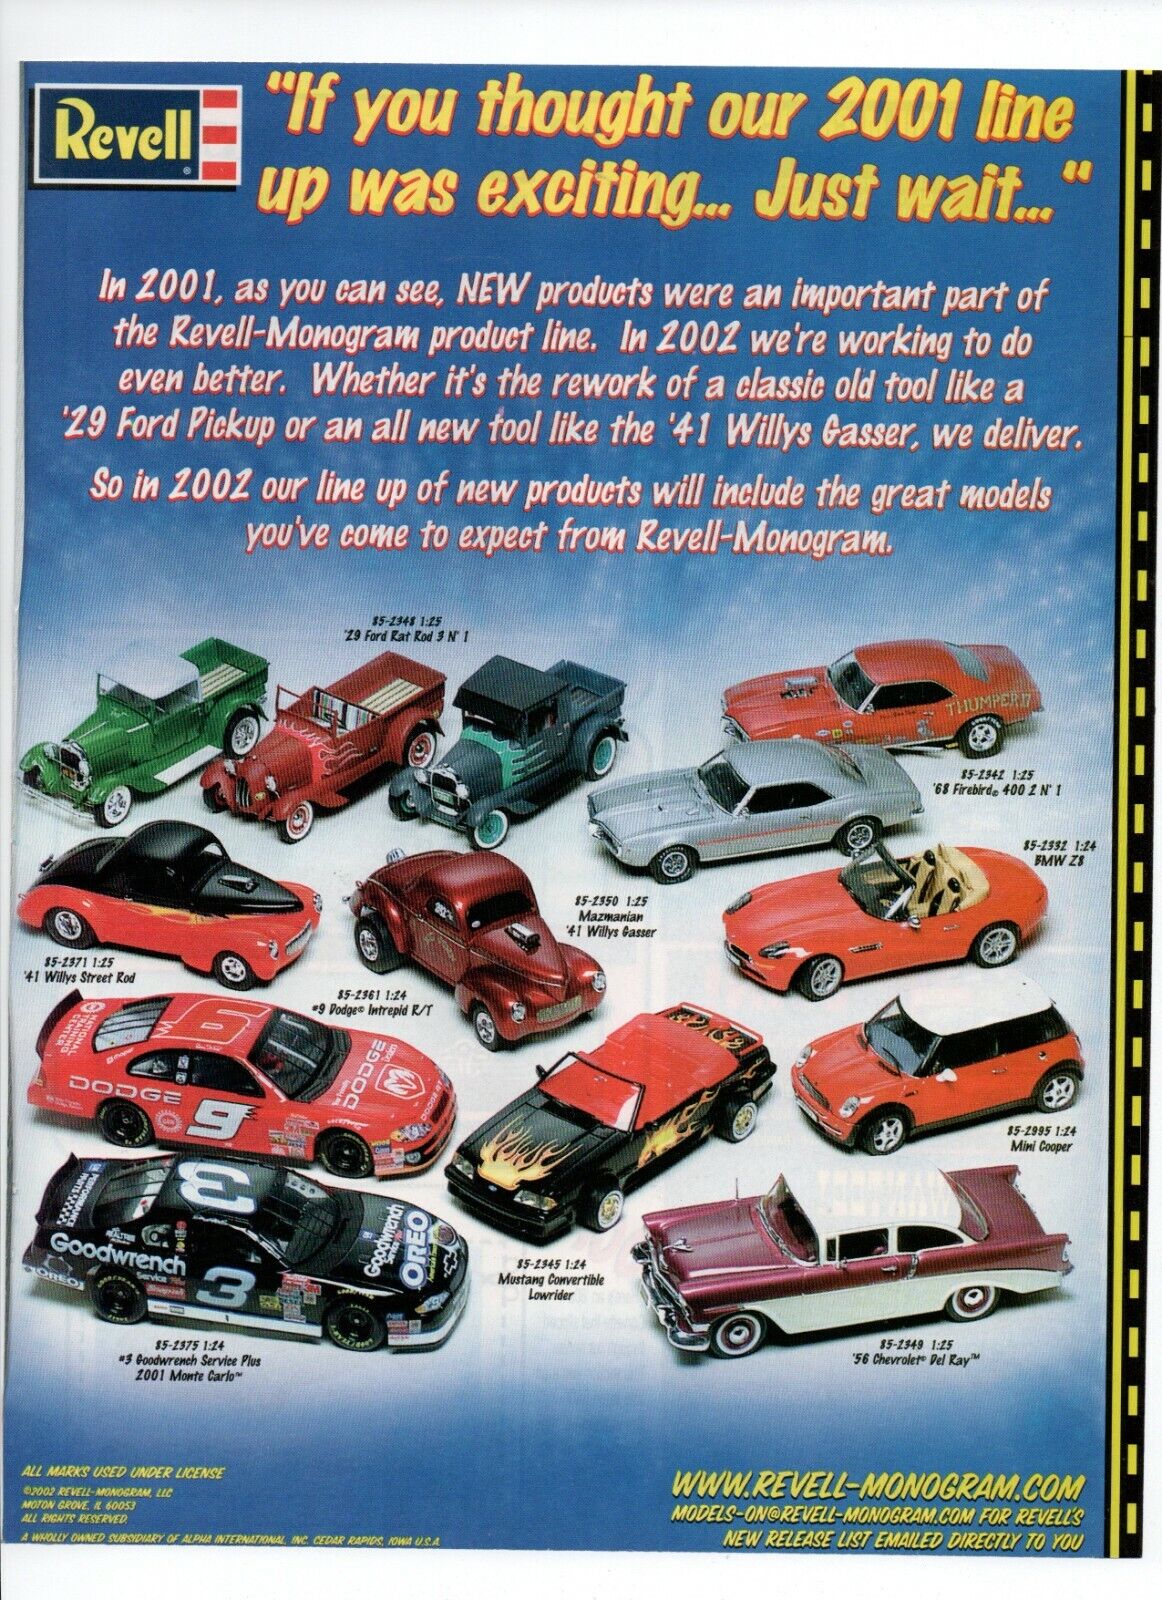 Revell \'29 Ford Pickup \'41 Willys Gasser Model Diecast Cars - 2002 Toys Print Ad